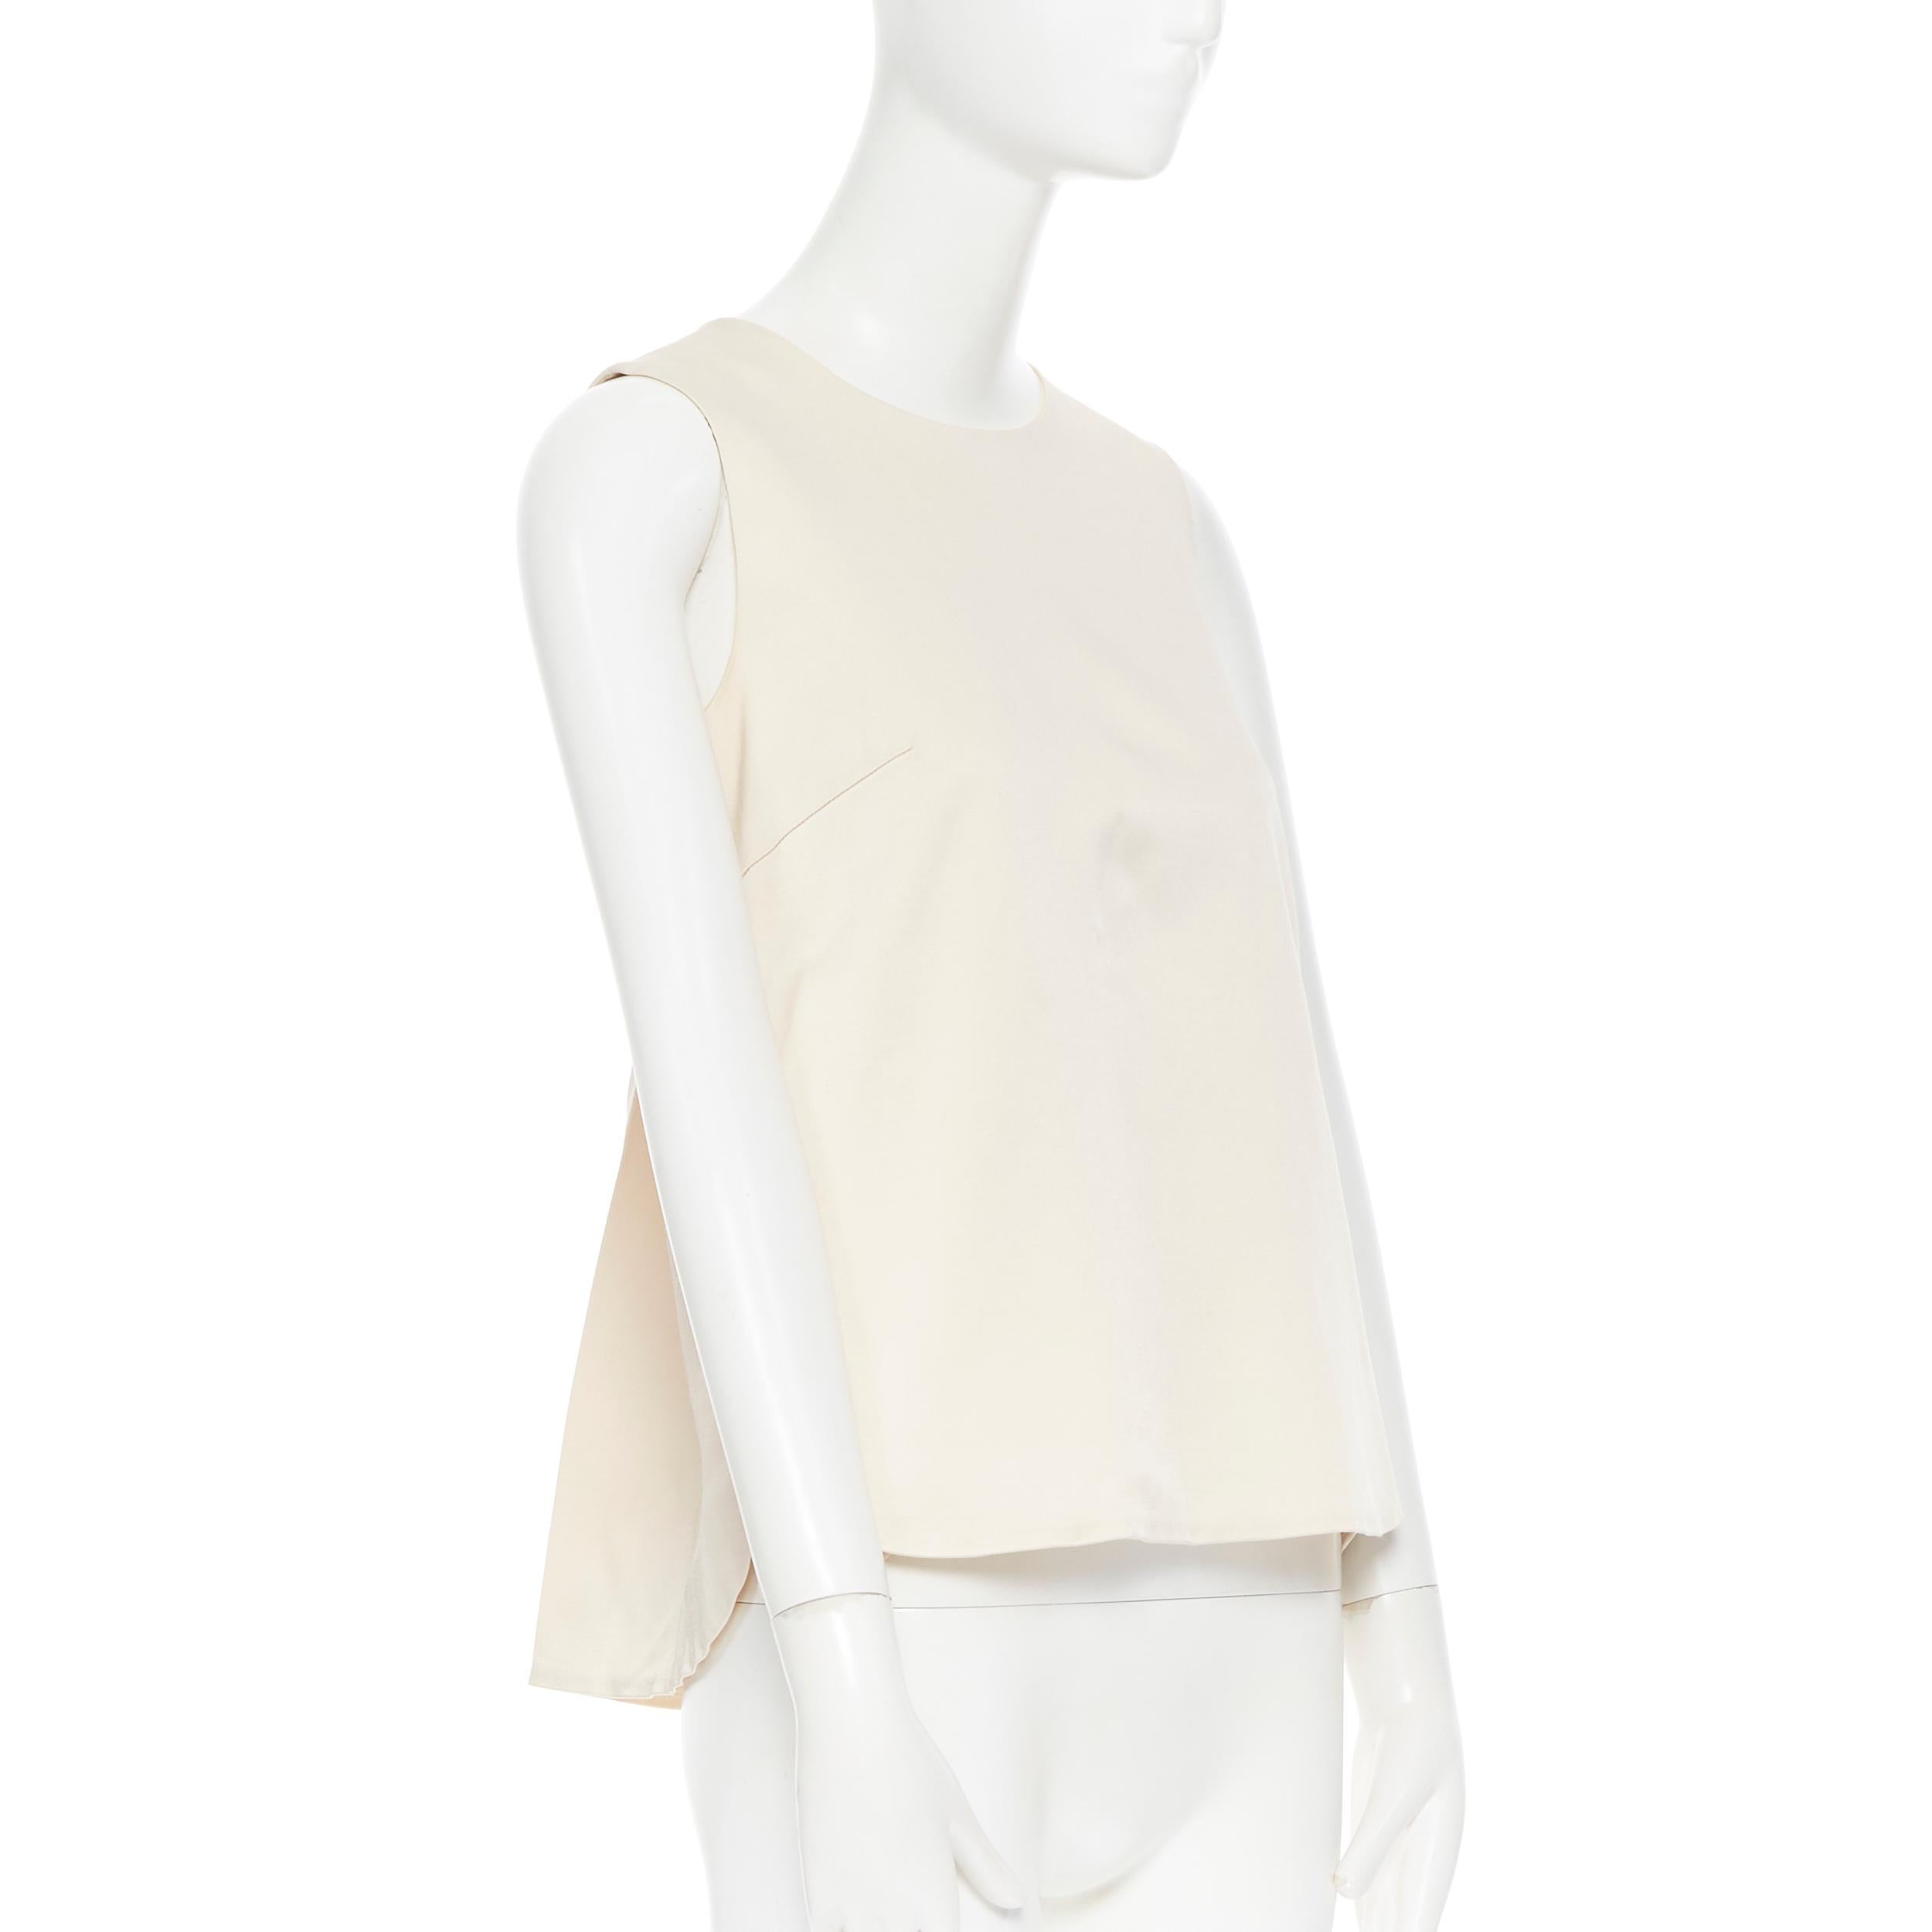 LISA PERRY beige stiff viscose curved hem dual slit pocket sleeveless top US0
Brand: Lisa Perry
Designer: Lisa Perry
Model Name / Style: Boxy top
Material: Viscose, wool, elastane
Color: Beige
Pattern: Solid
Closure: Zip
Lining material: Silk
Extra